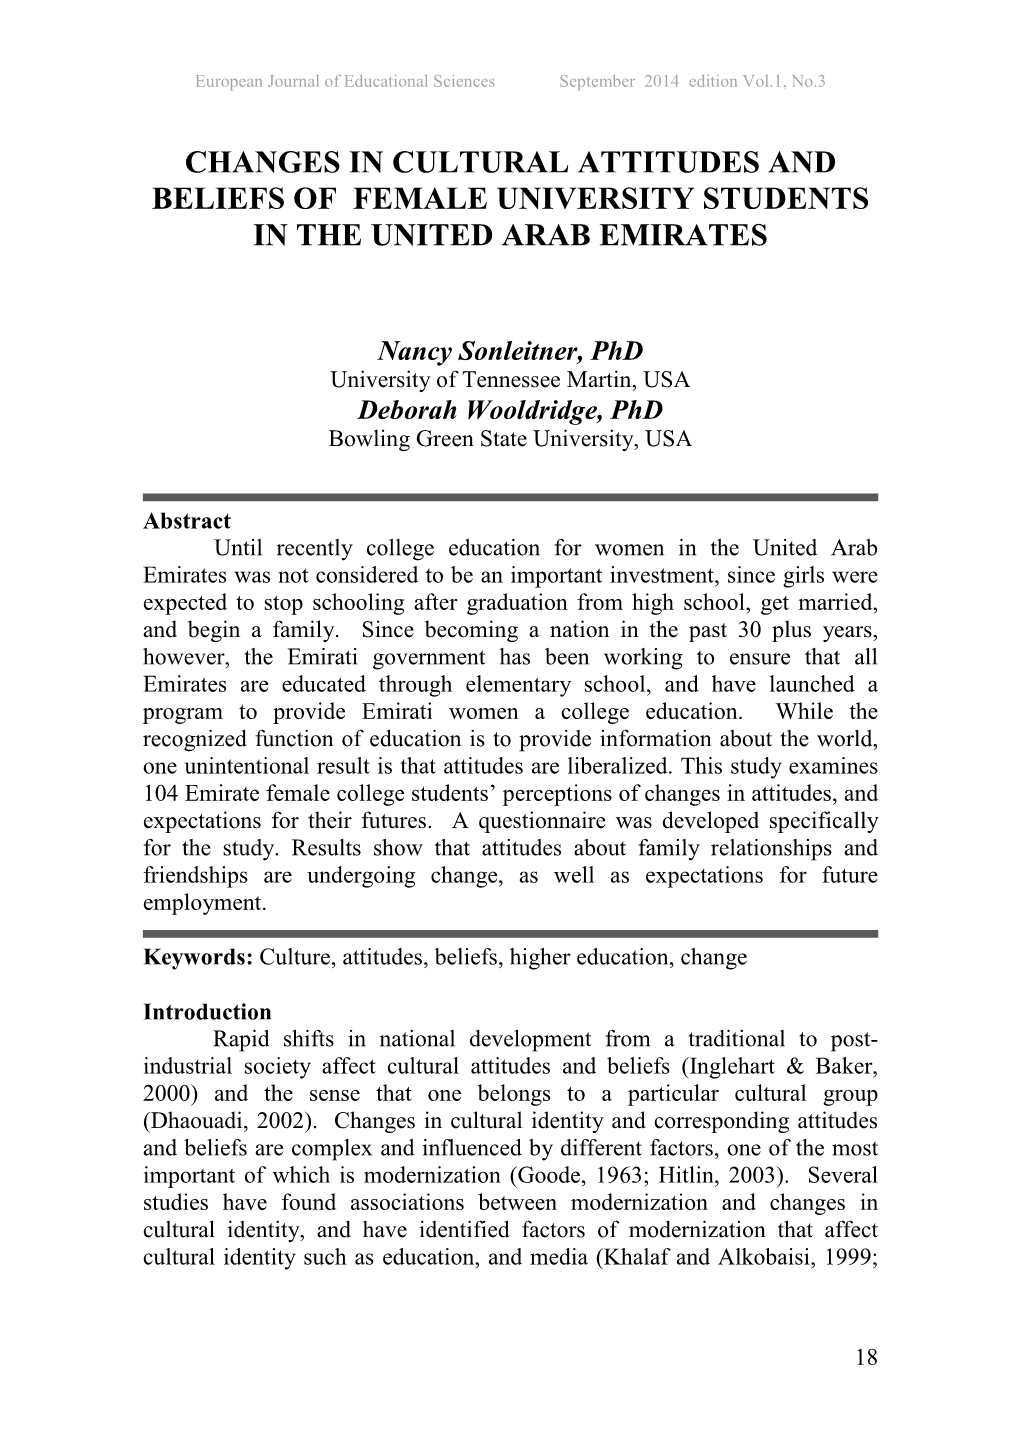 Changes in Cultural Attitudes and Beliefs of Female University Students in the United Arab Emirates